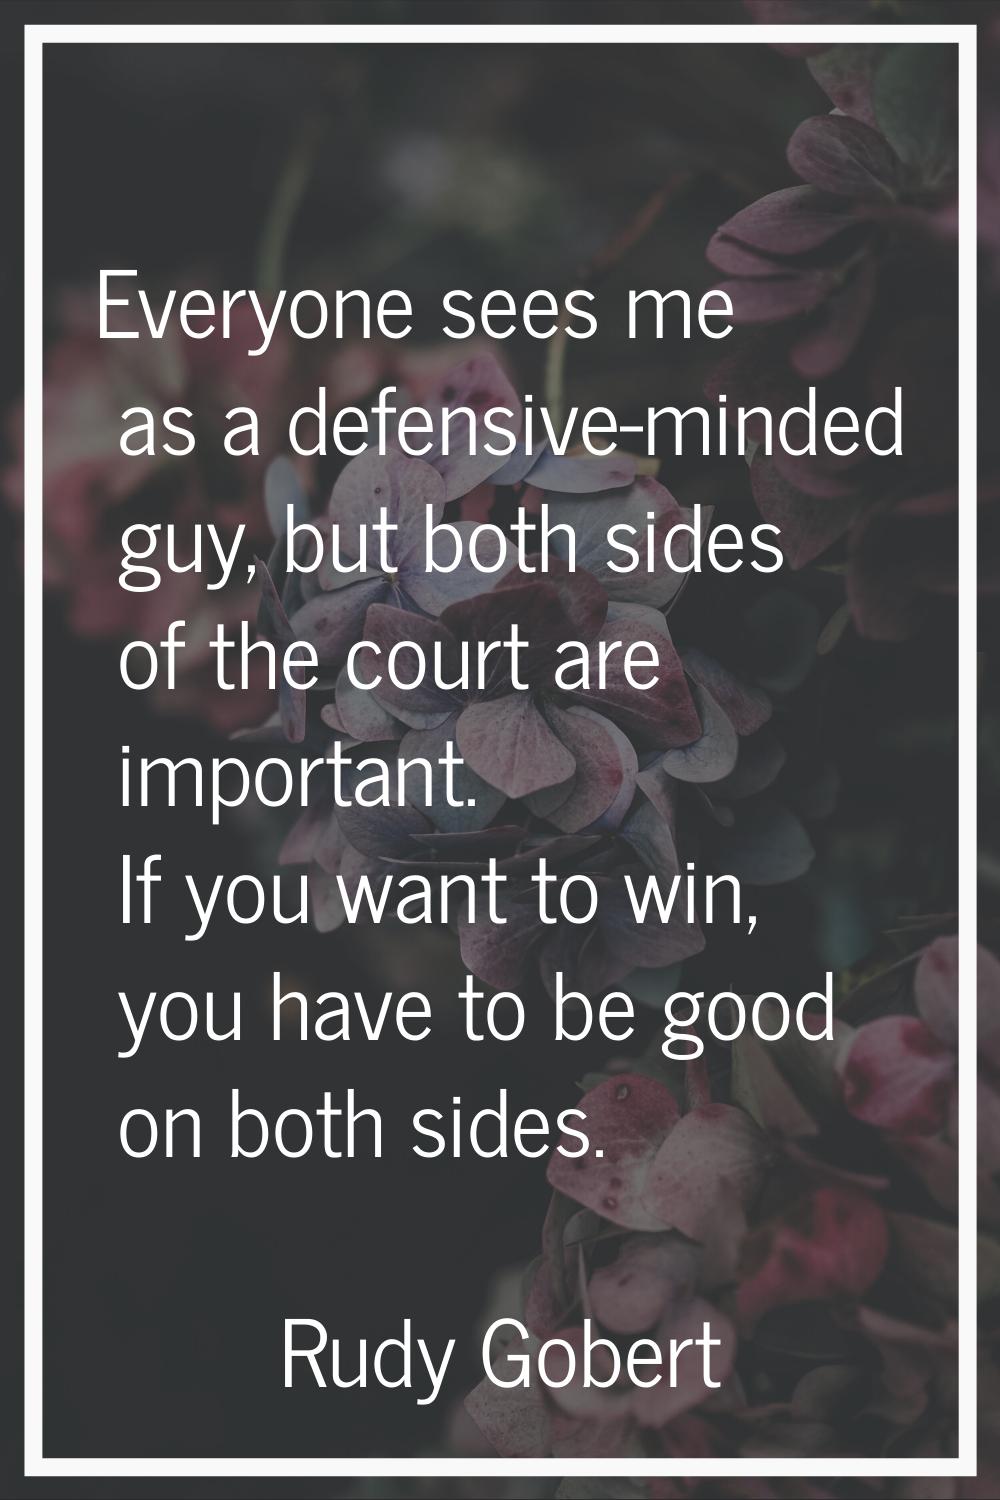 Everyone sees me as a defensive-minded guy, but both sides of the court are important. If you want 